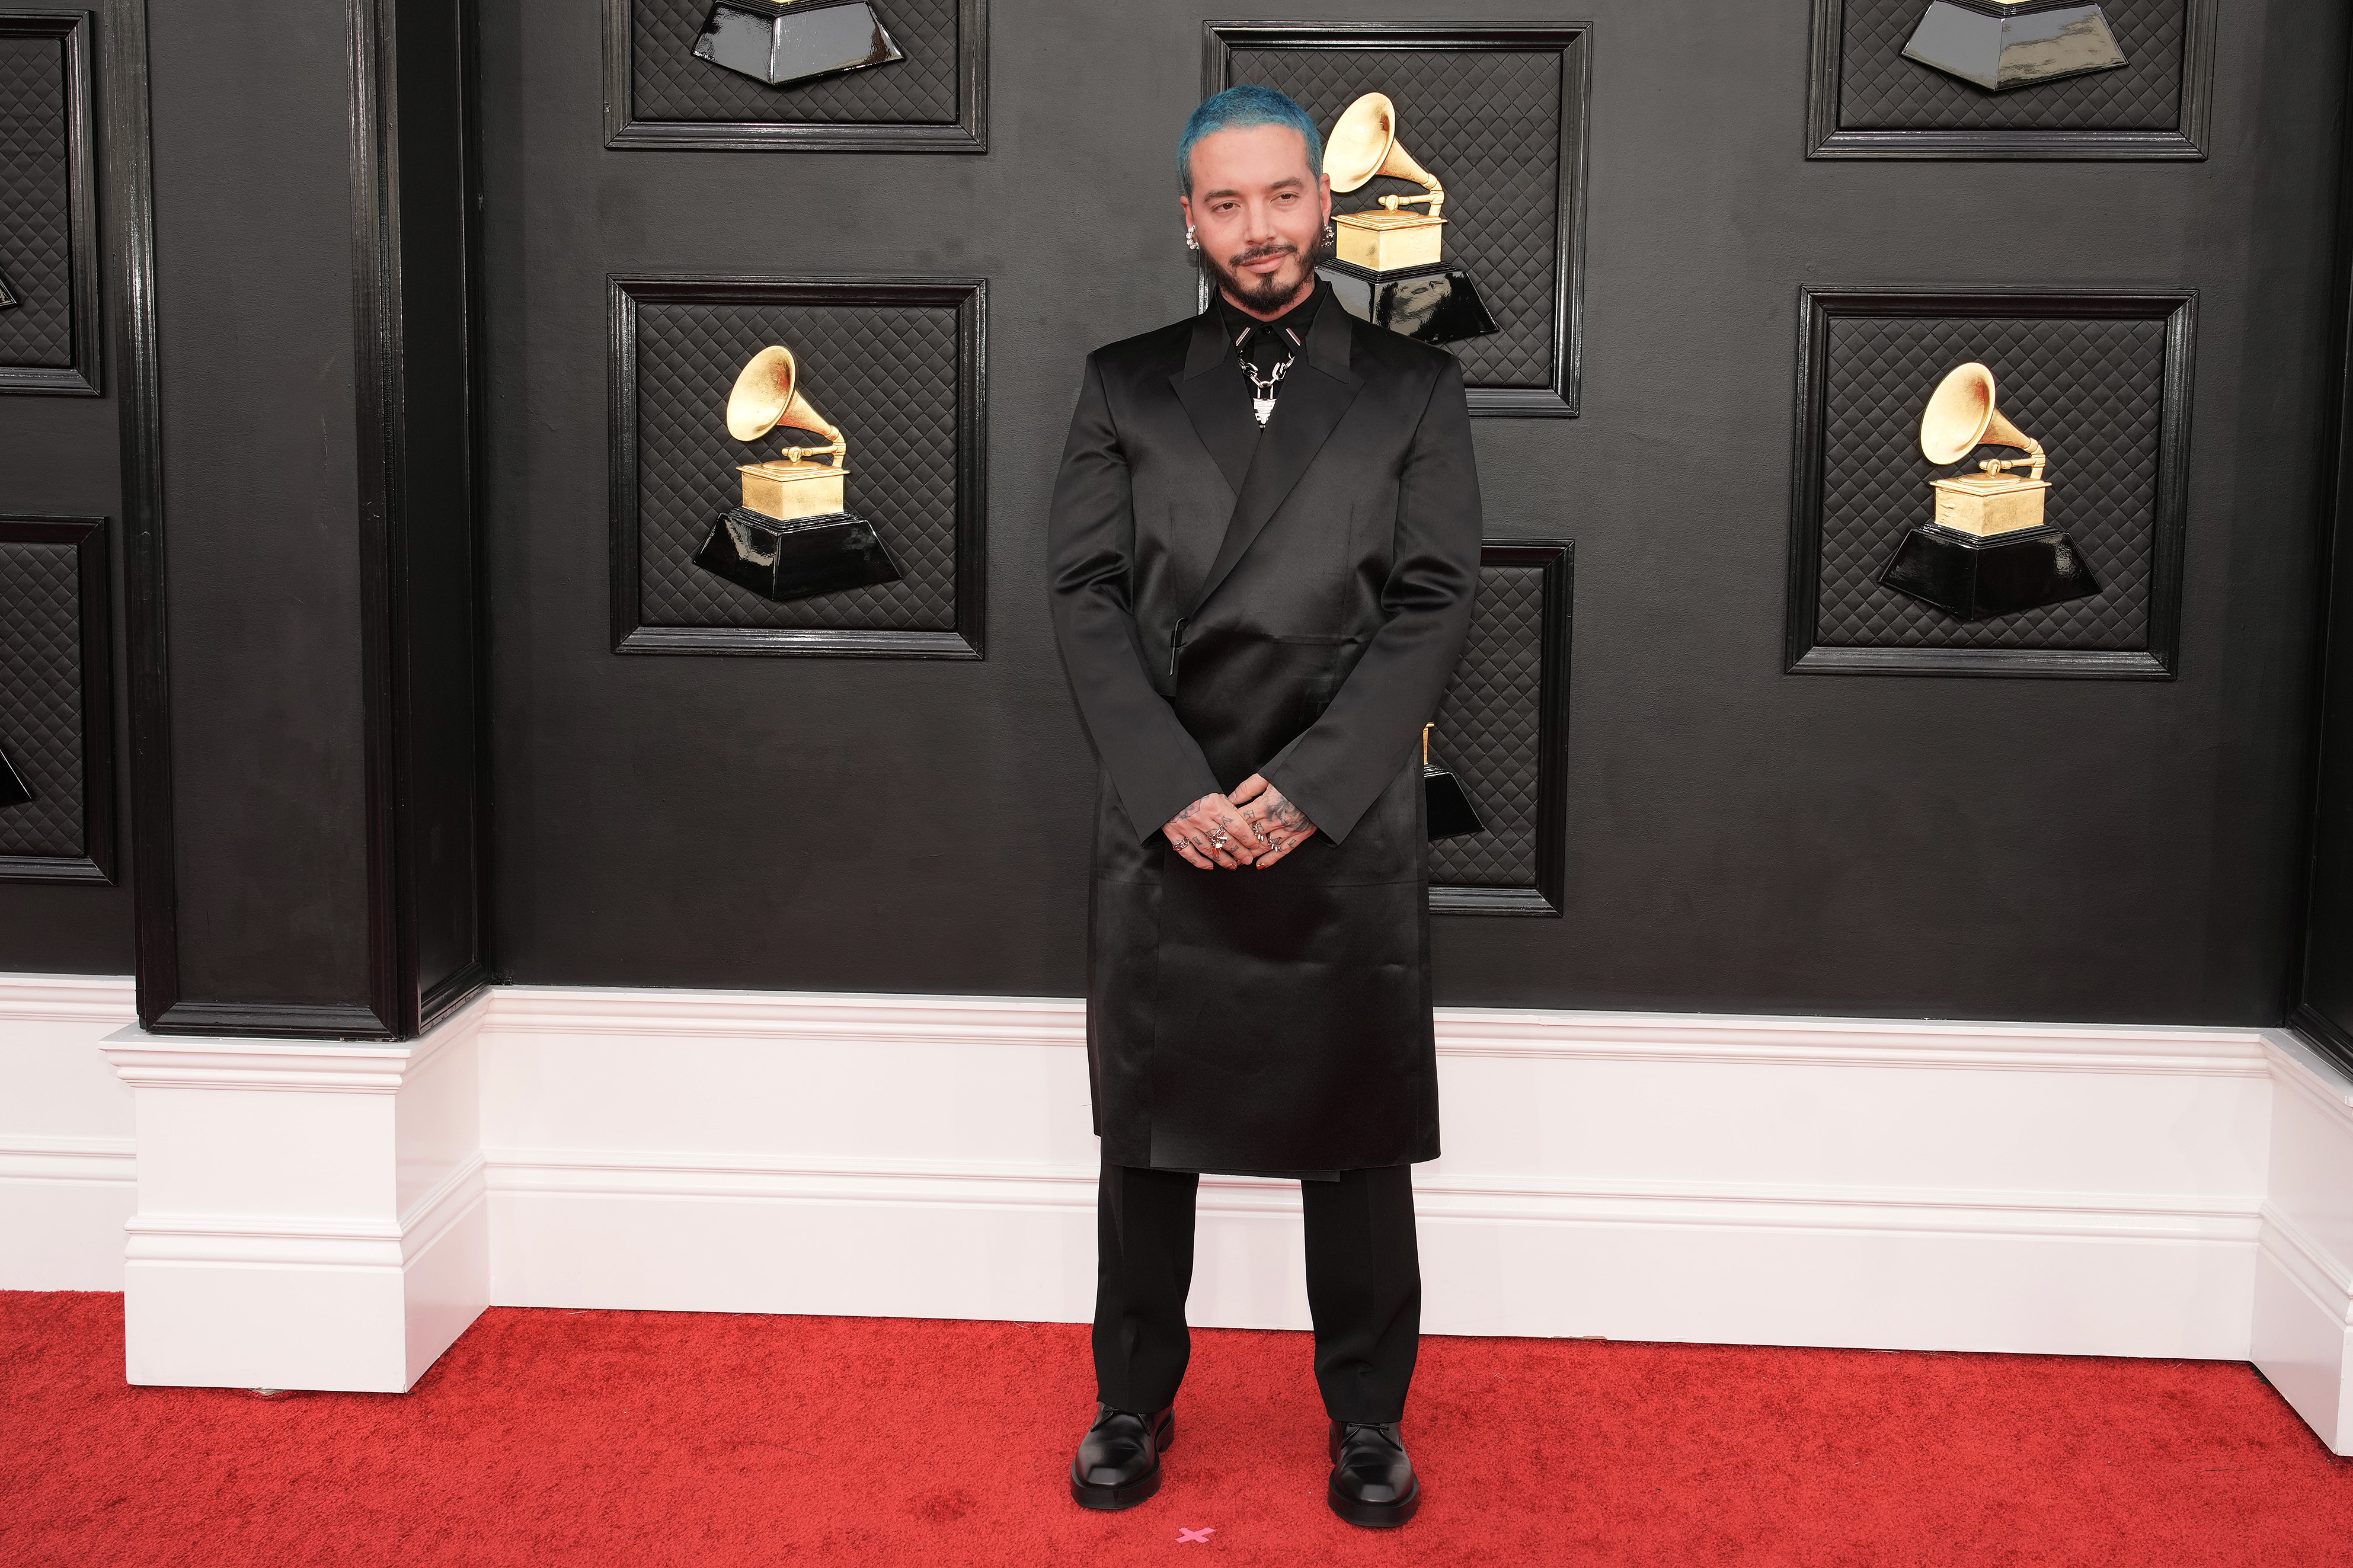 J Balvin at the Grammys 2022: the wild look of the red carpet - Infobae